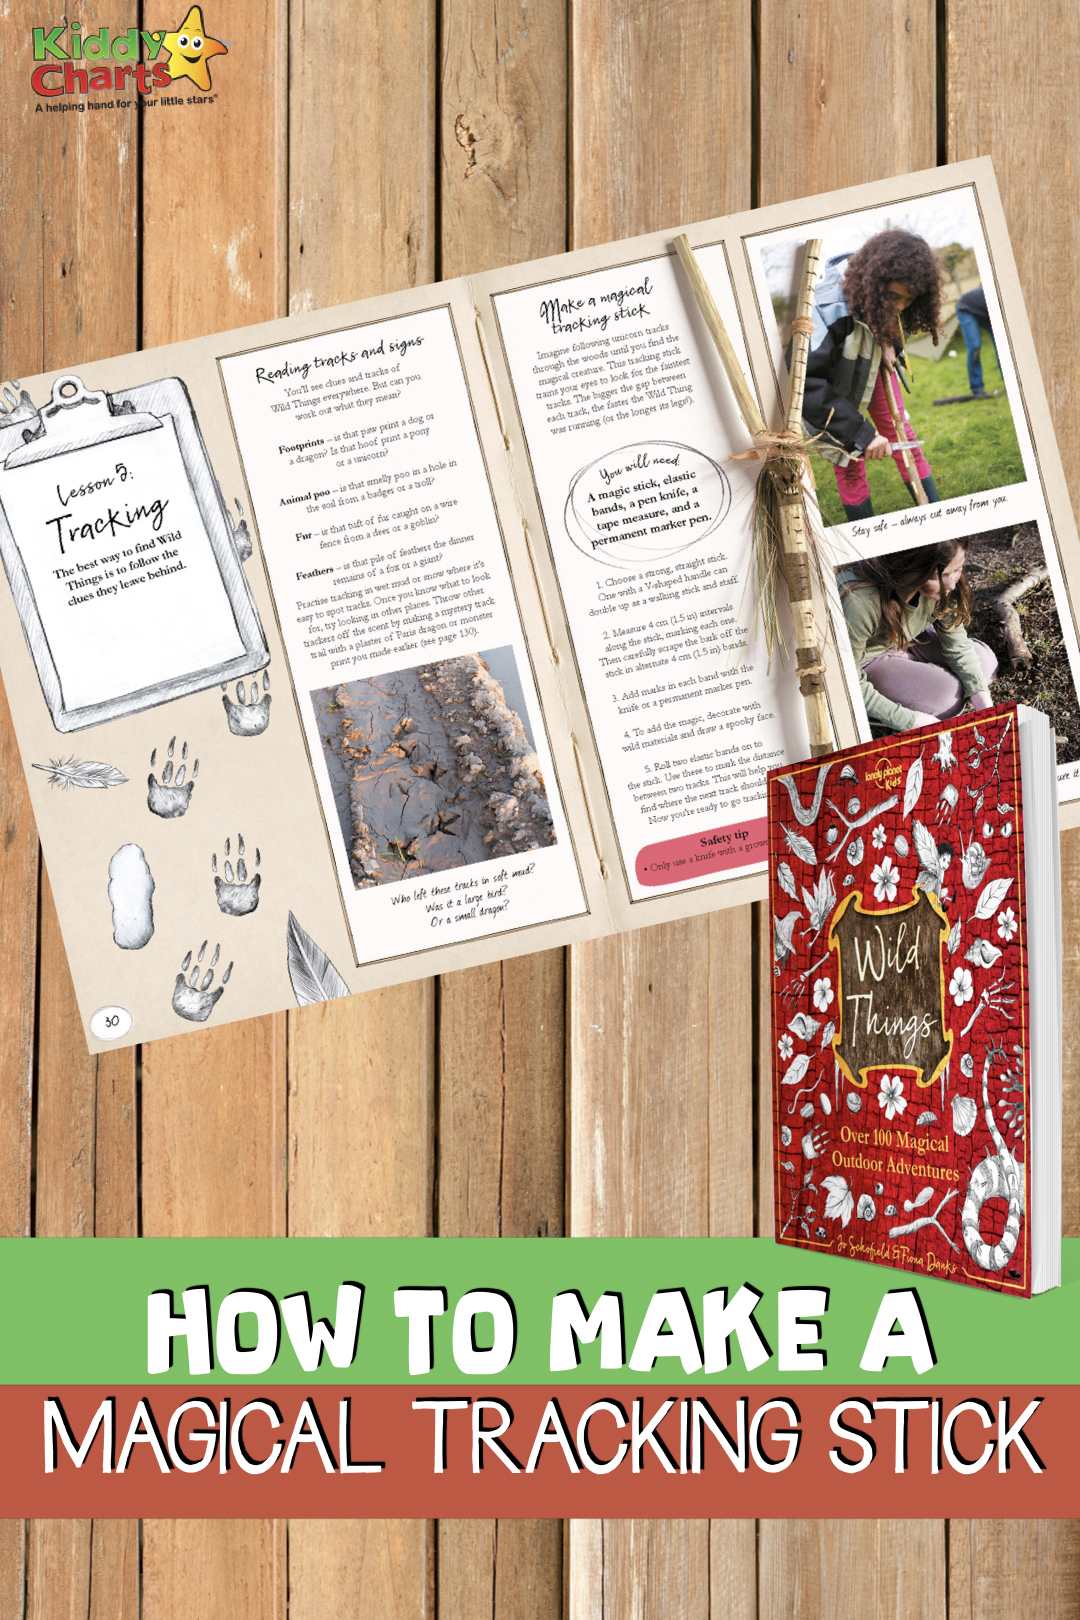 Today we’re sharing how to make a magical tracking stick so that you can easily get outdoors and have some fun tracking magical creatures that live among us. #nature #forestschool #kidsactivities #magic #fairies #fairyactivity